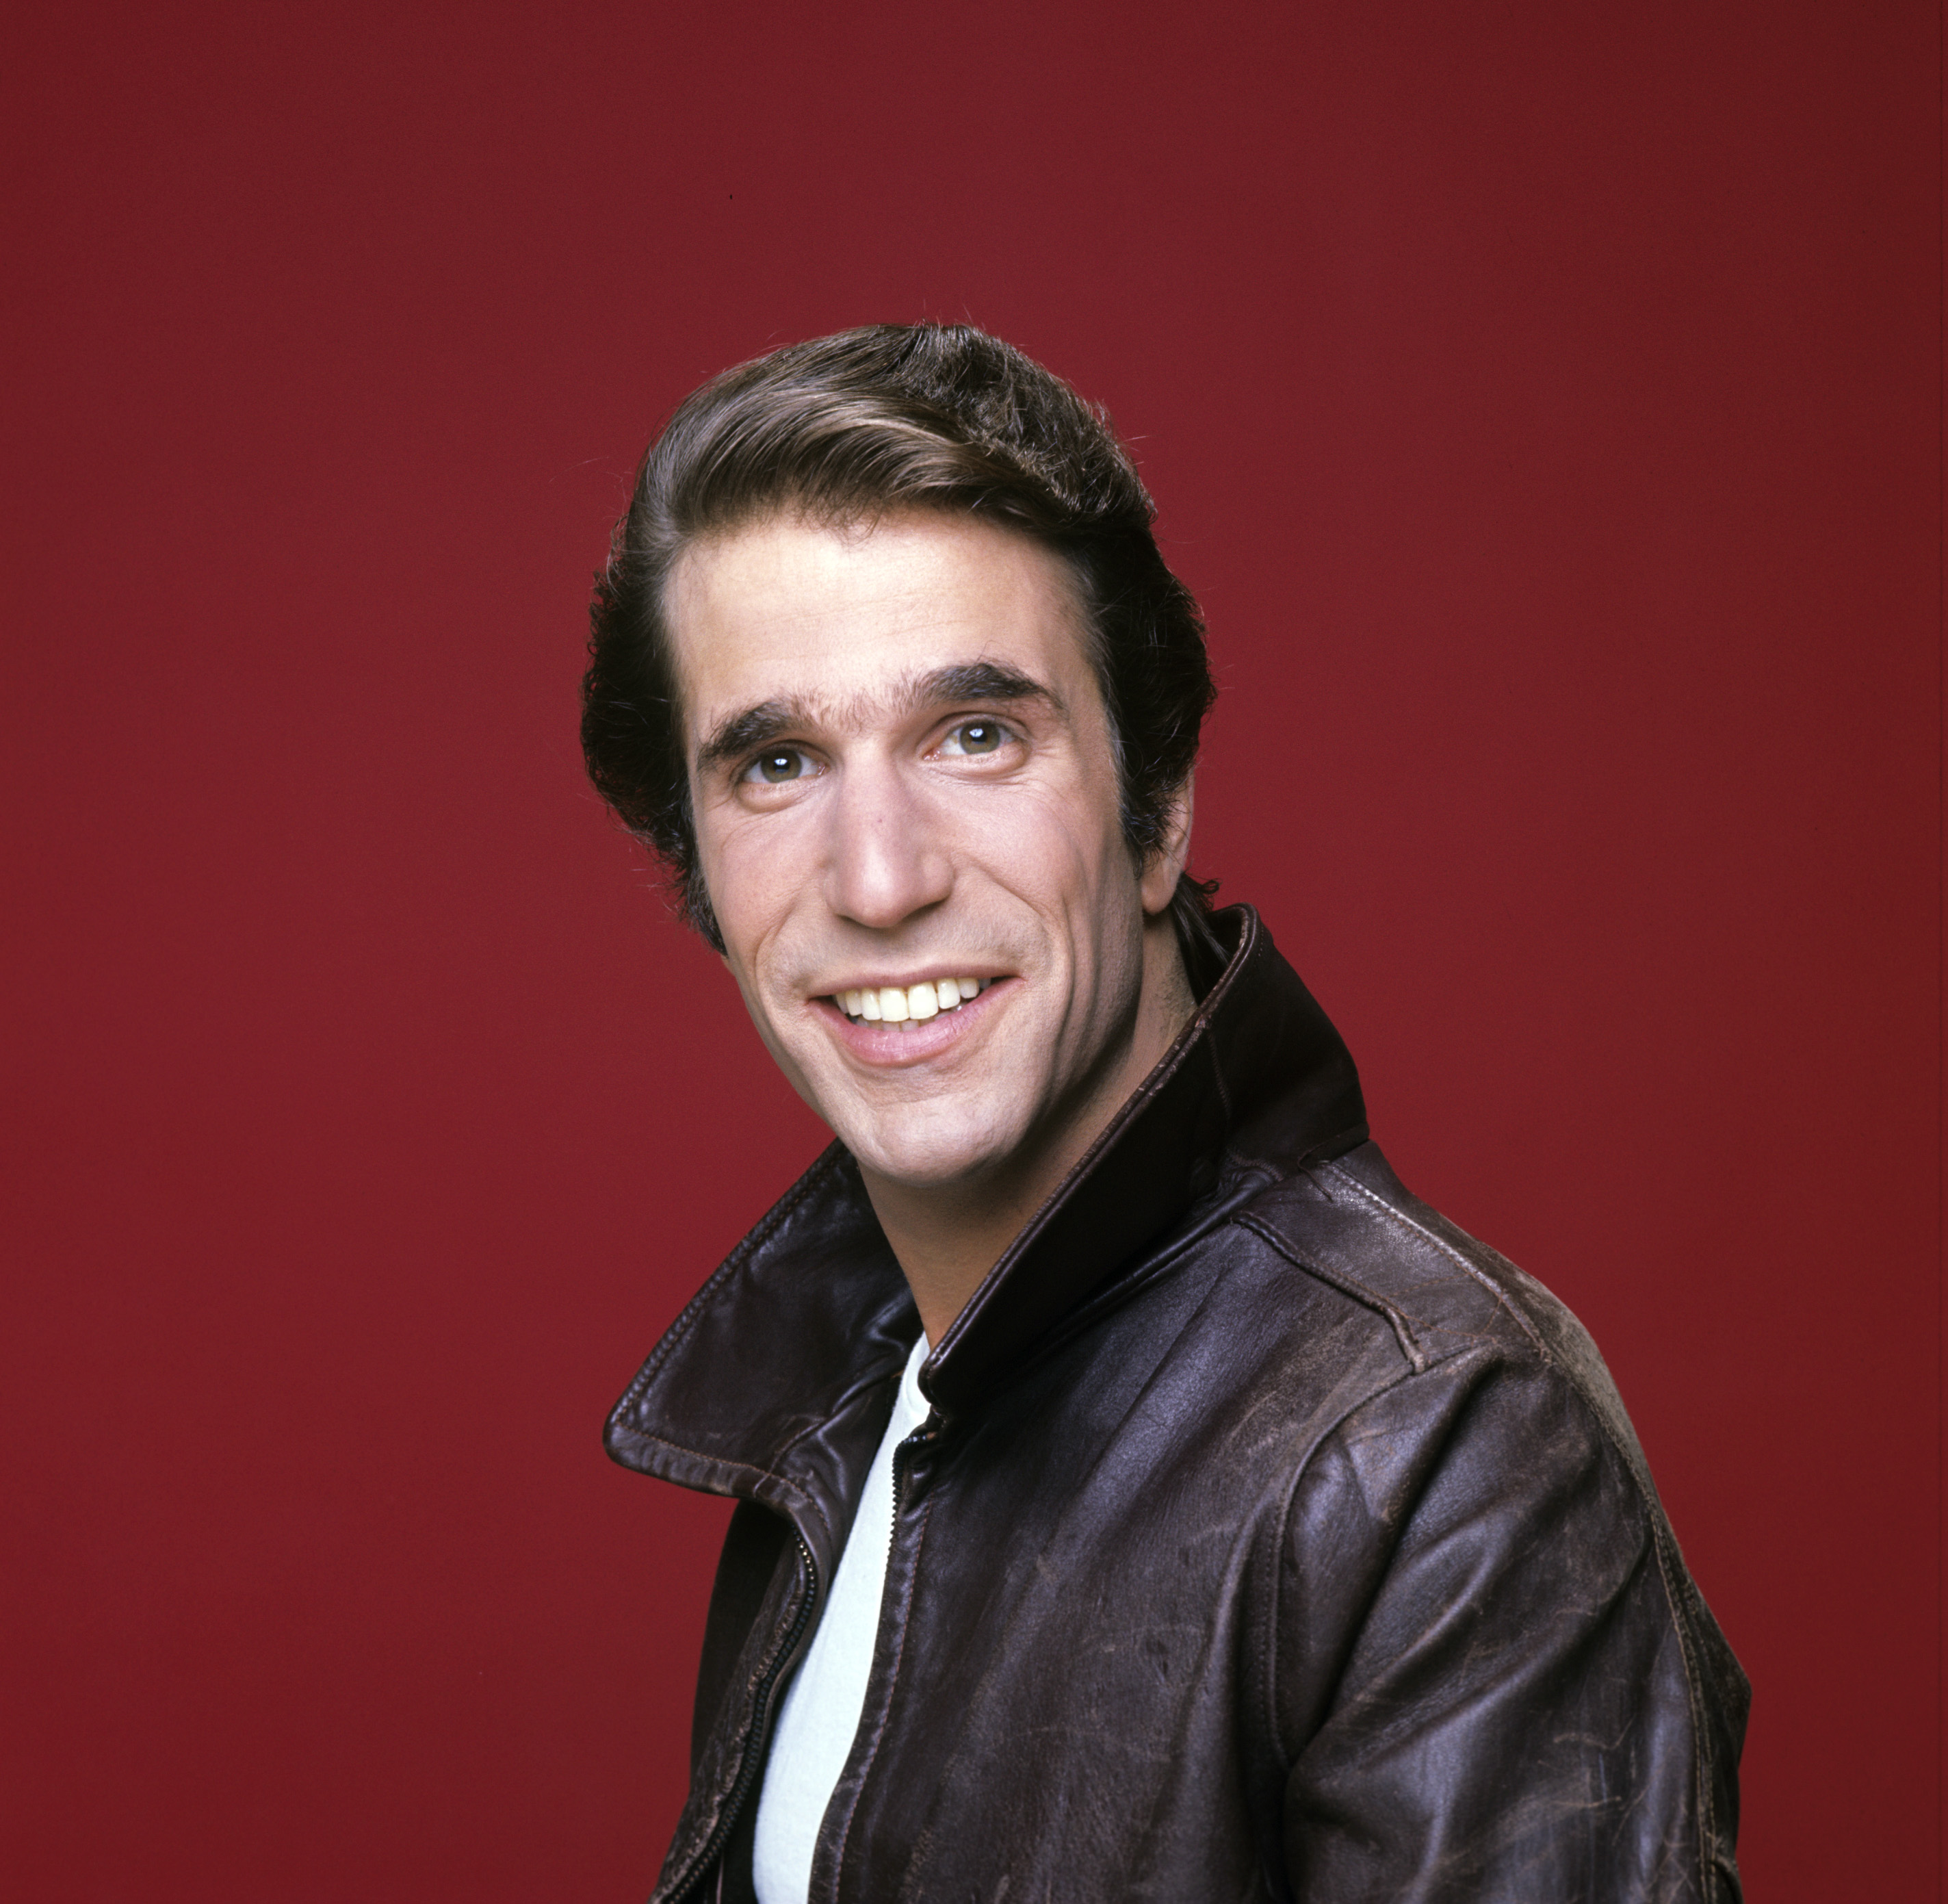 Harry Winkler of Happy Days in a leather jacket in a promo image. He turned down Grease.